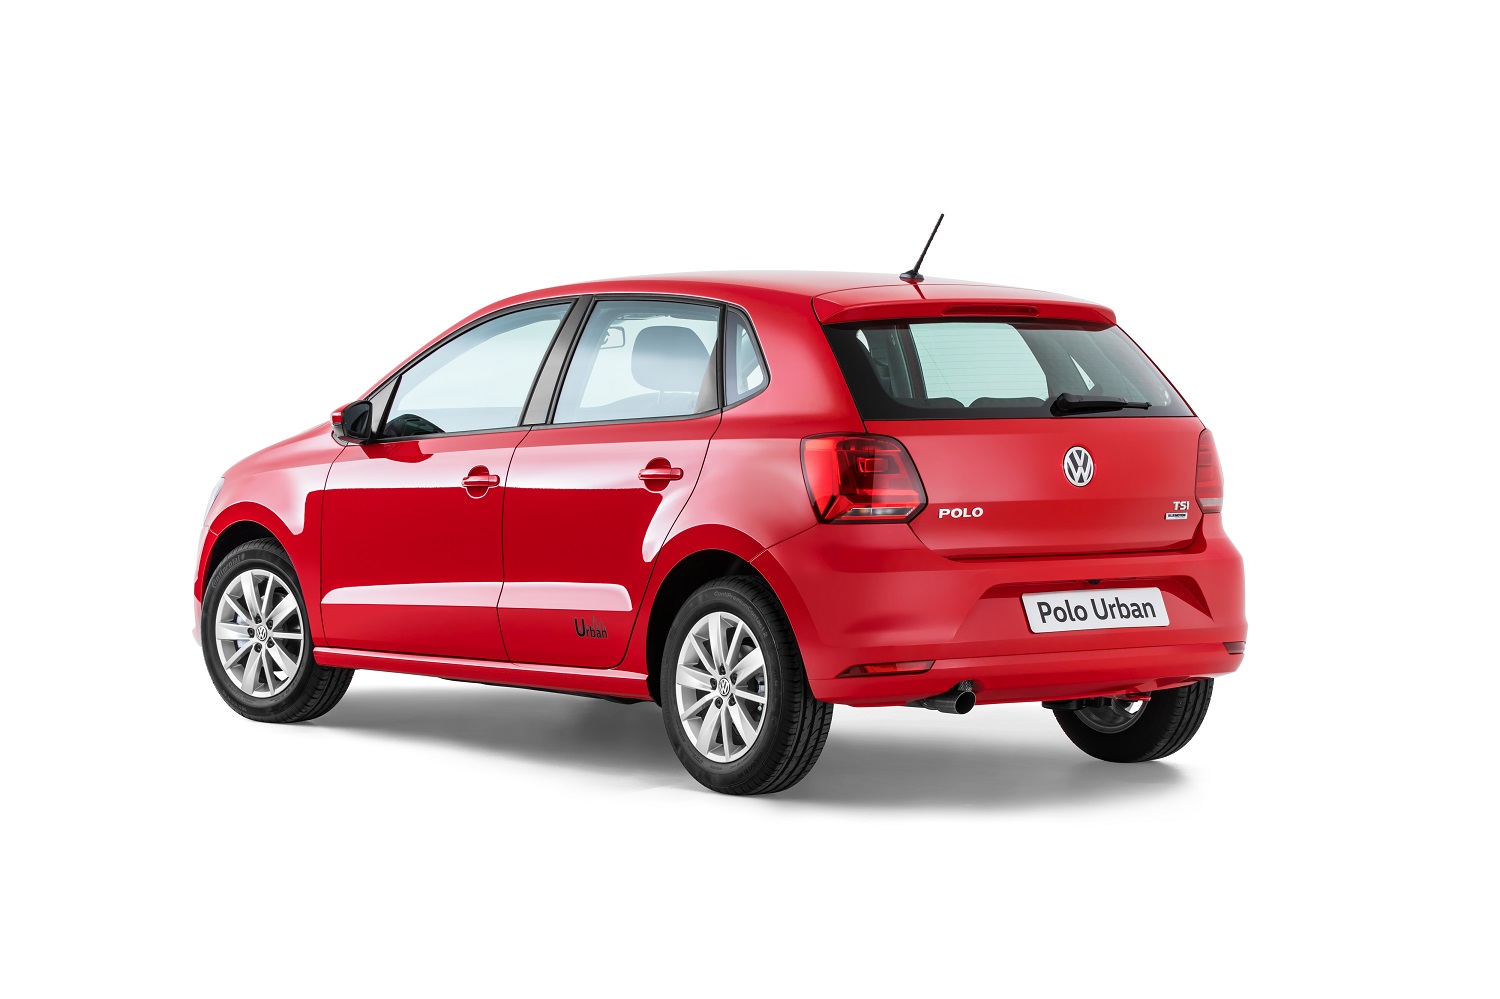 Urbane and sporty – Volkswagen's Polo Urban